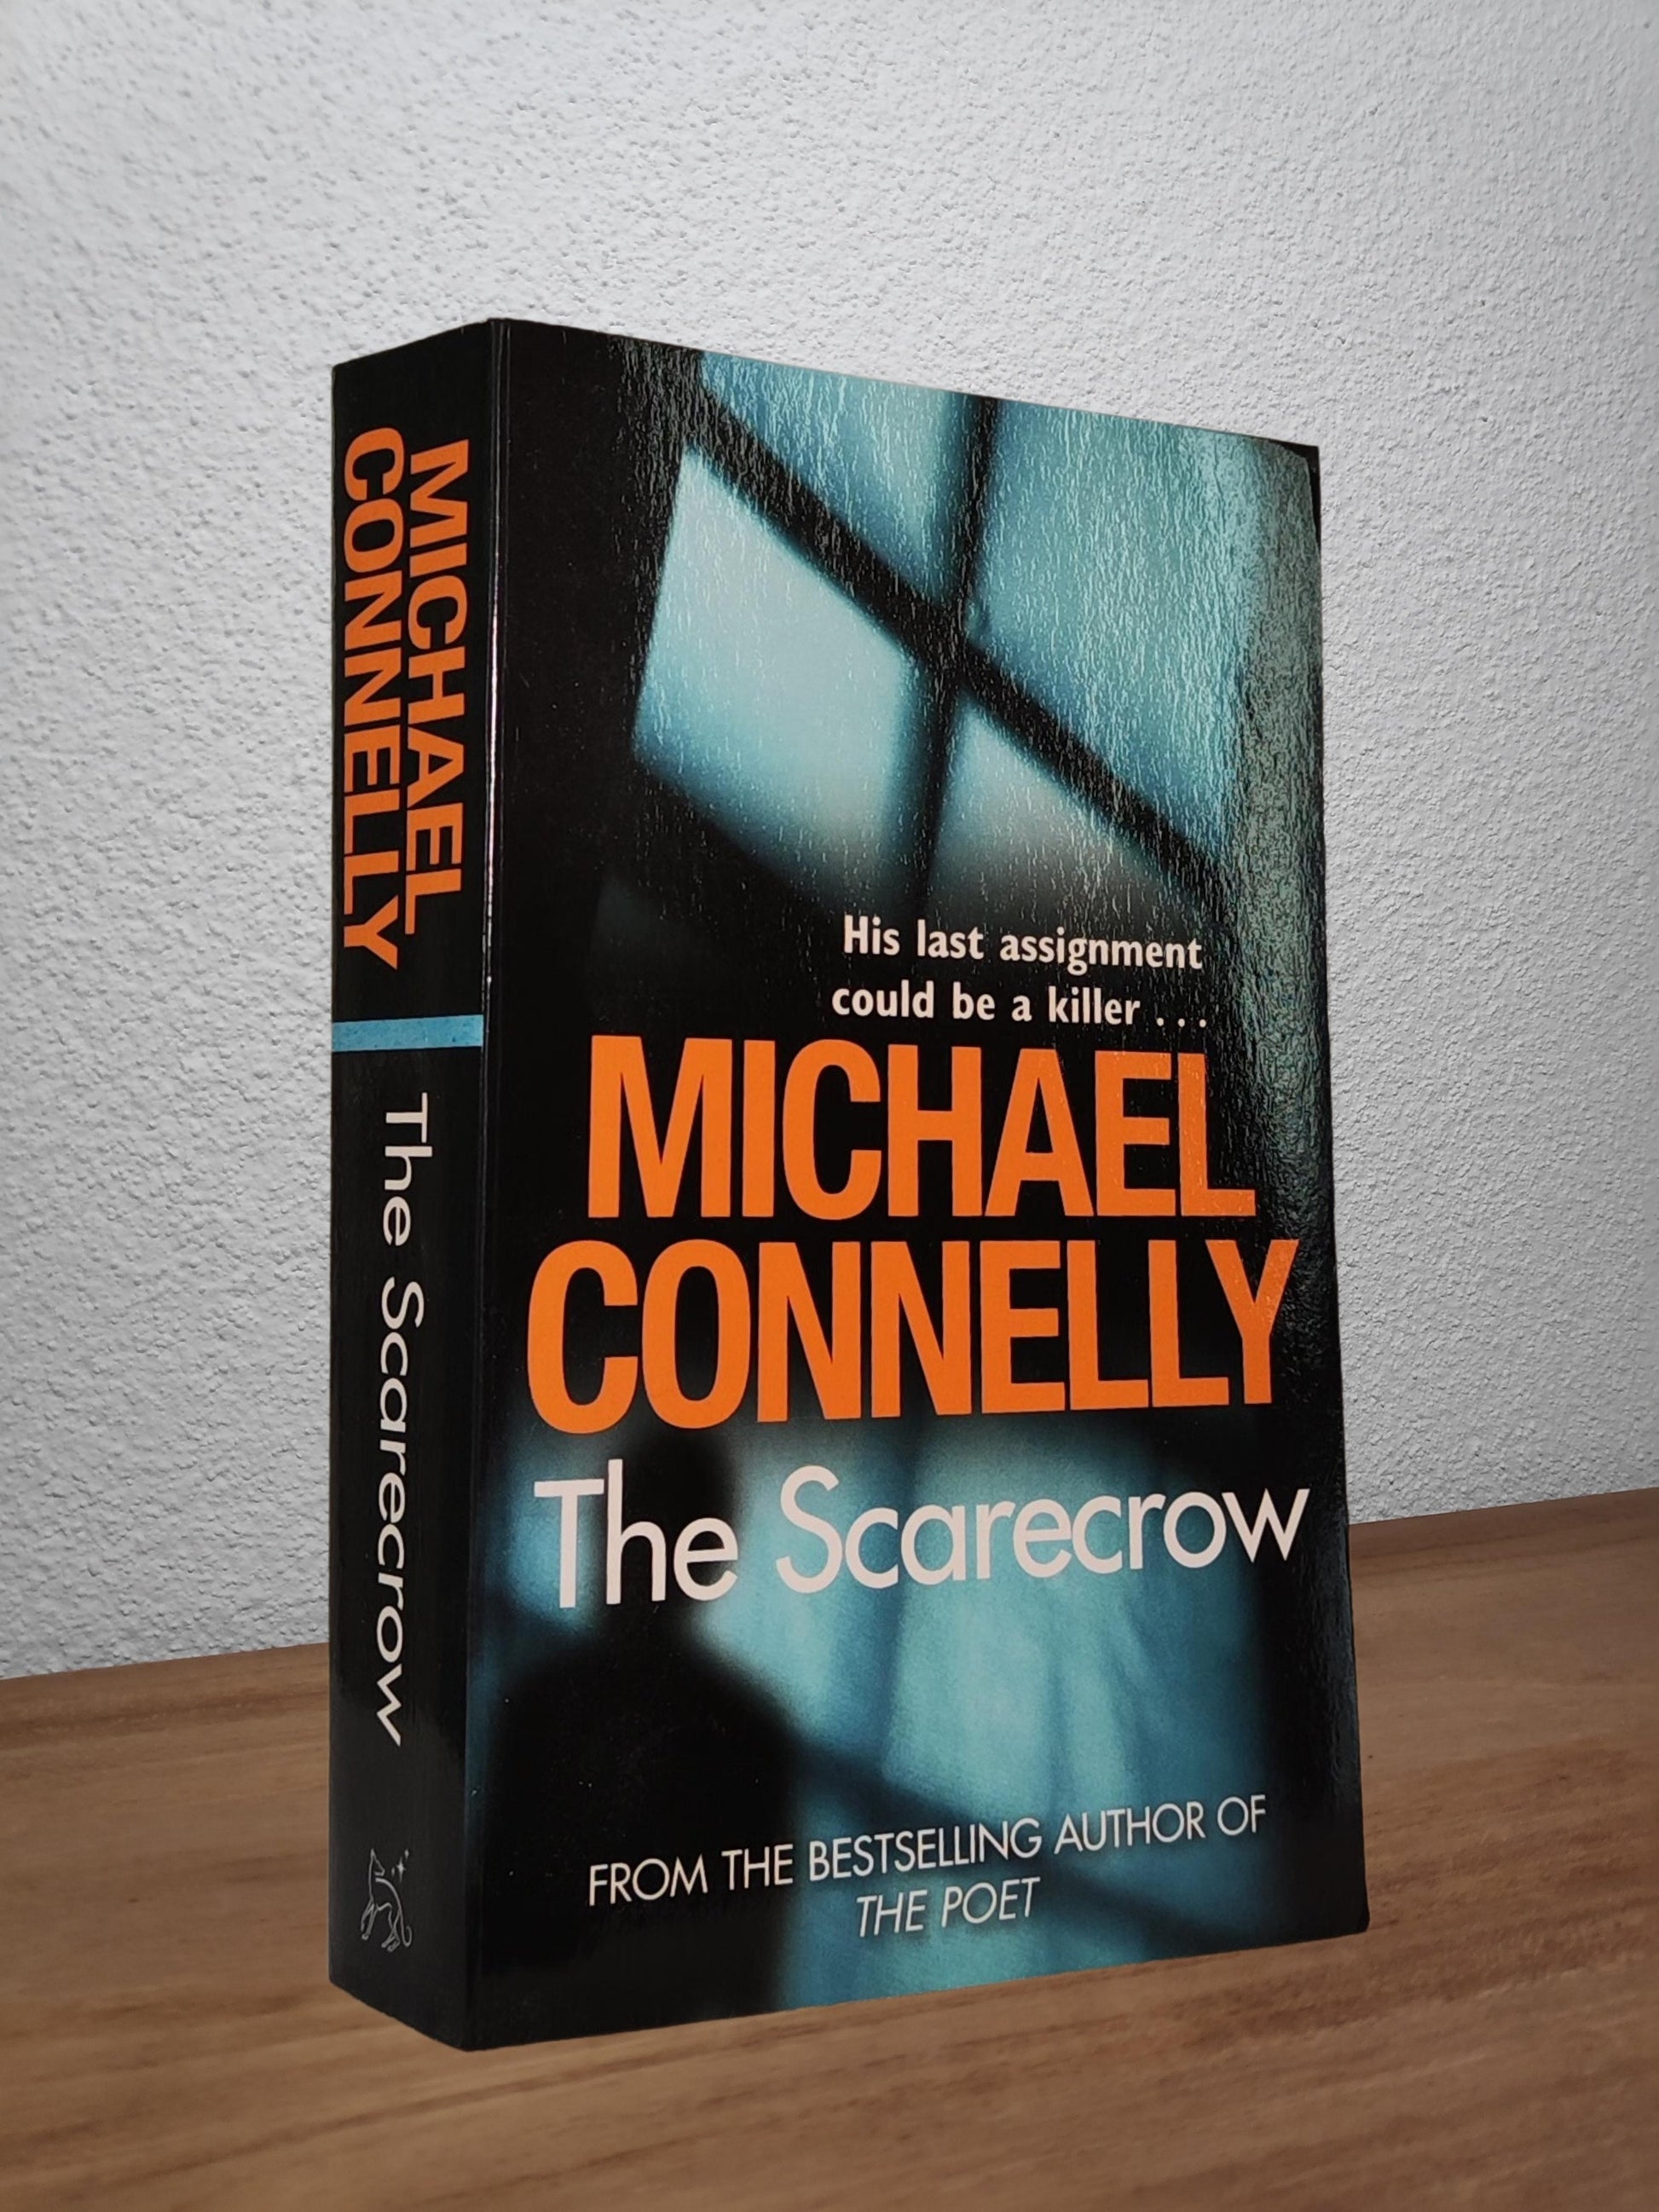 Michael Connelly - The Scarecrow (Jack McEvoy #2) - Second-hand english book to deliver in Zurich & Switzerland